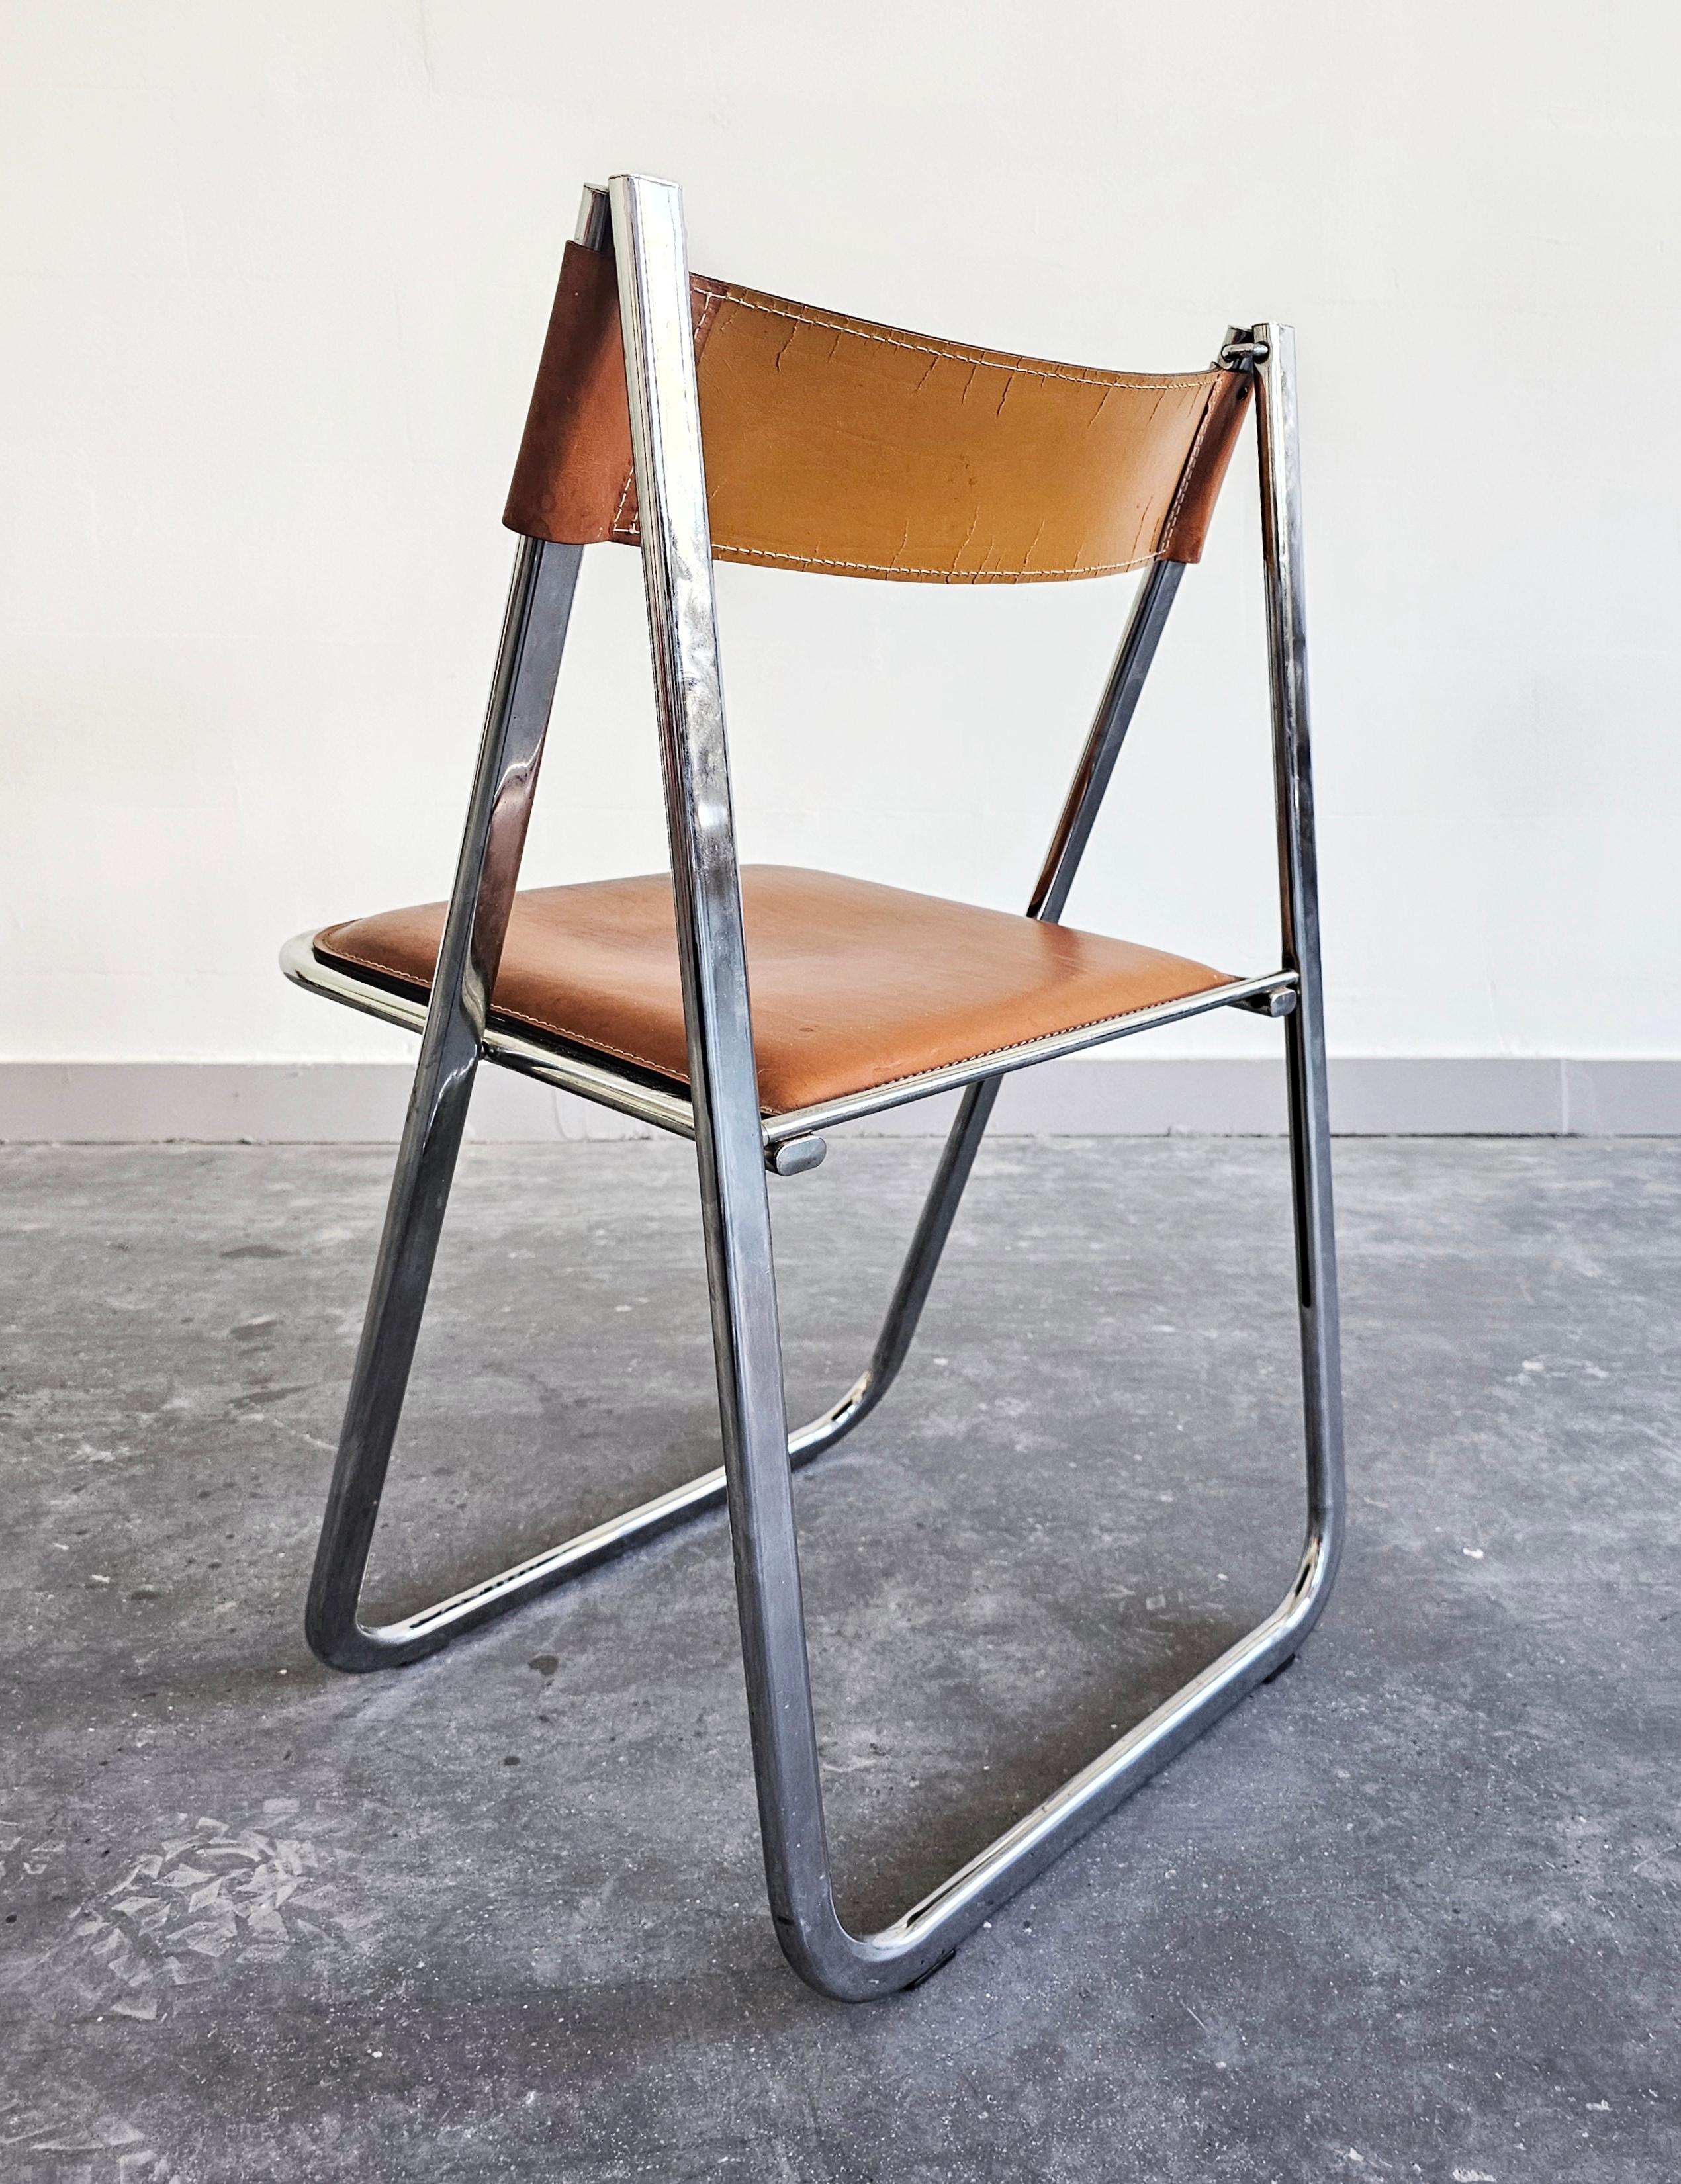 Pair of Folding Chairs by Arrben, model Tamara, in cognac leather, Italy 1970s For Sale 5